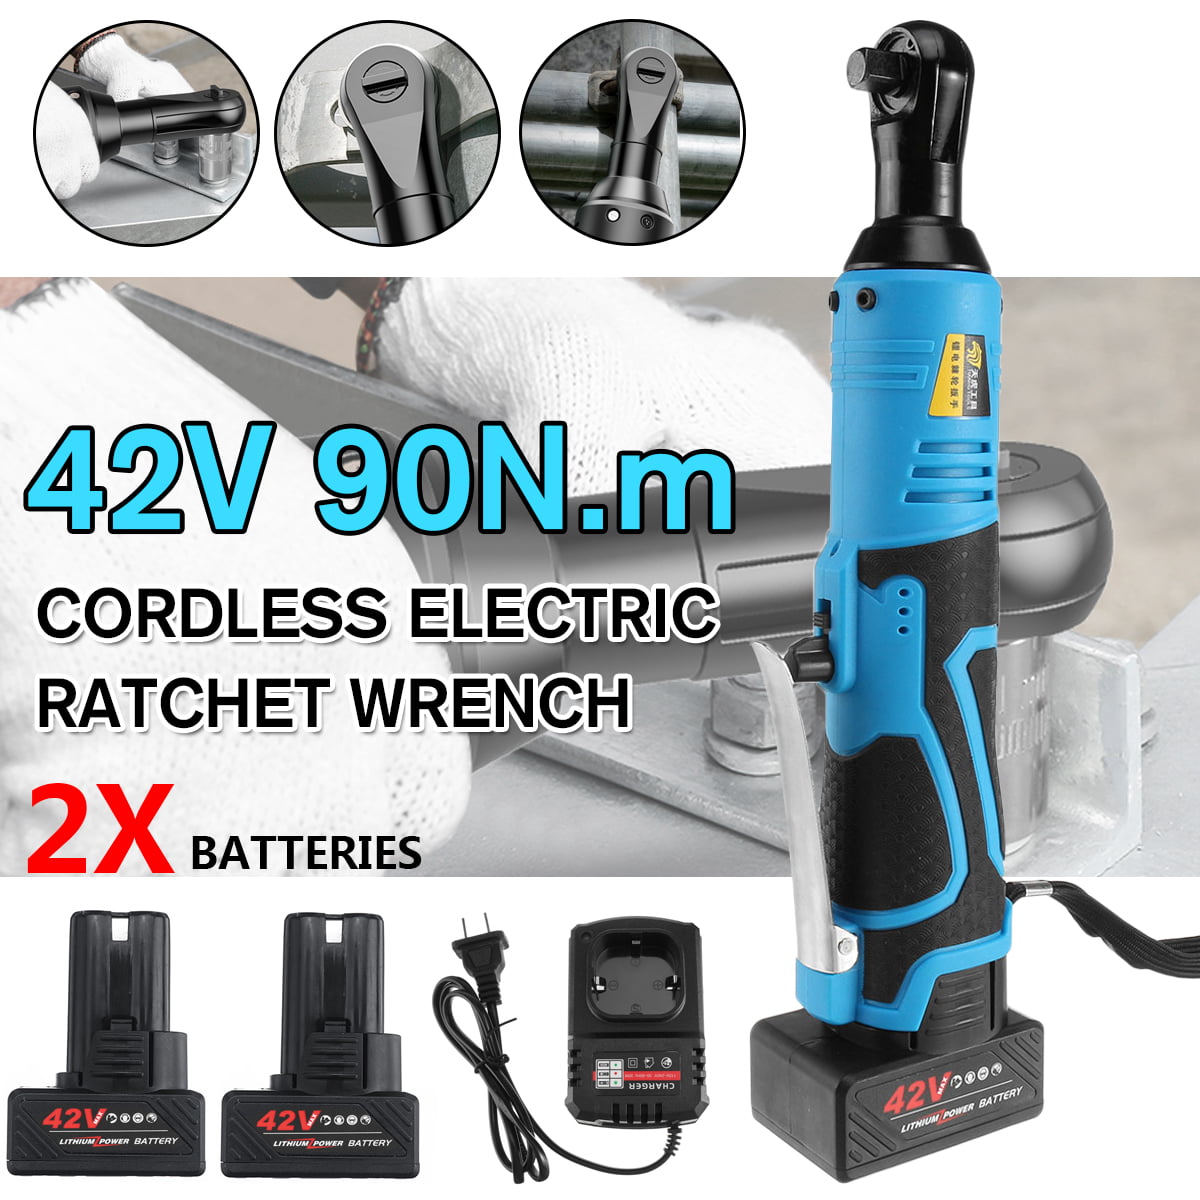 Battery Cordless Right Angle Ratchet Wrench Square Head 230RPM 28V 90N.m 3/8in 